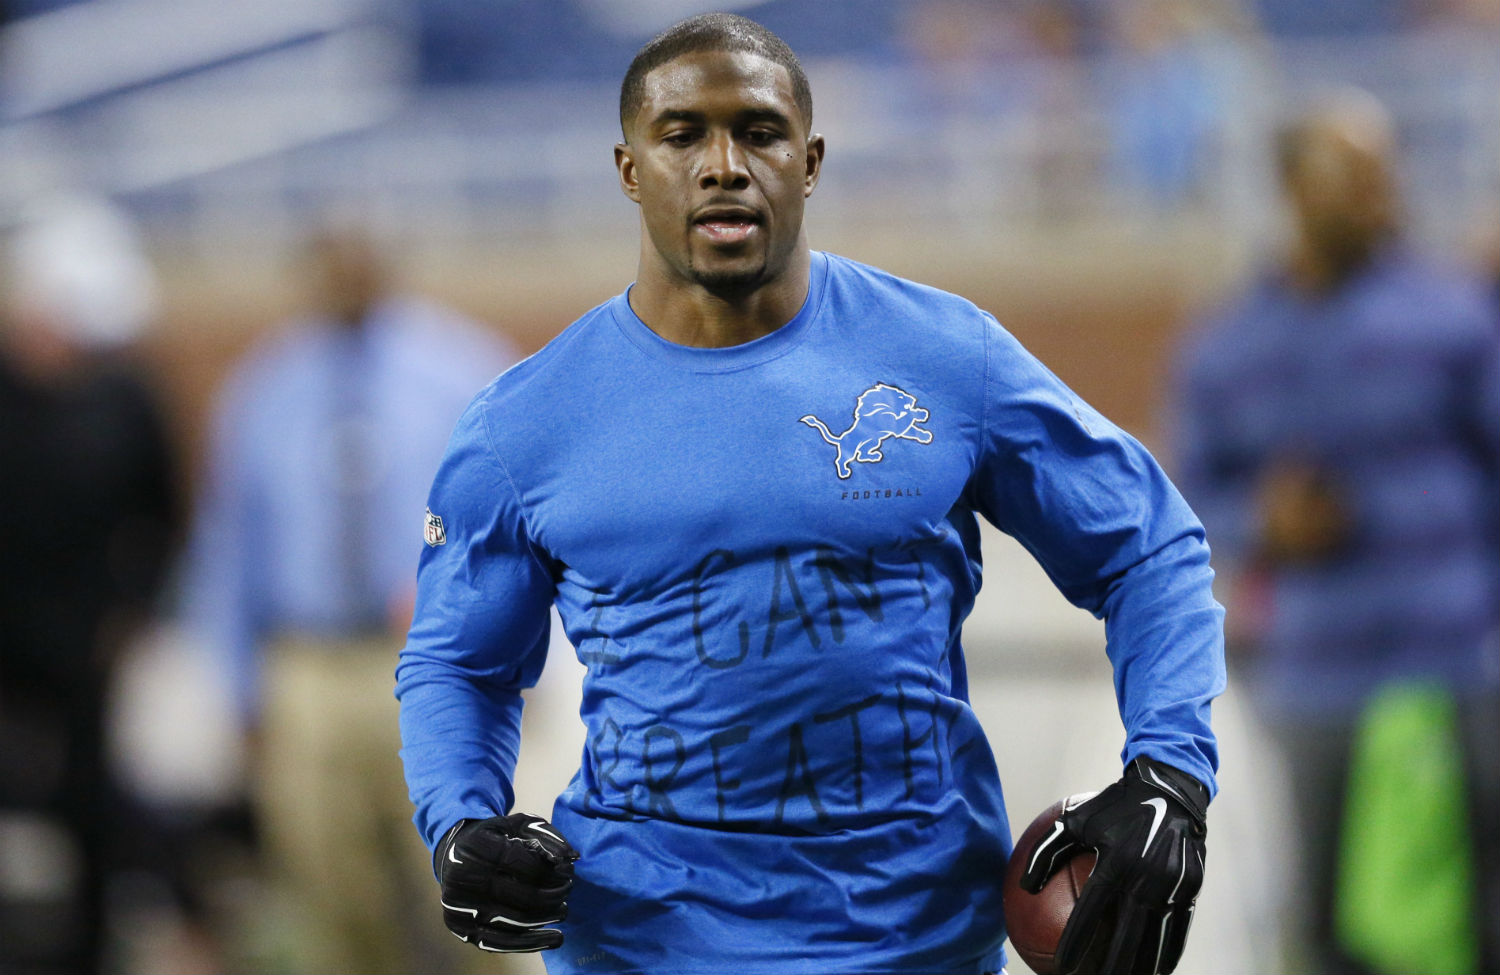 #BlackLivesMatter Takes the Field: A Weekend of Athletes Speaking Out